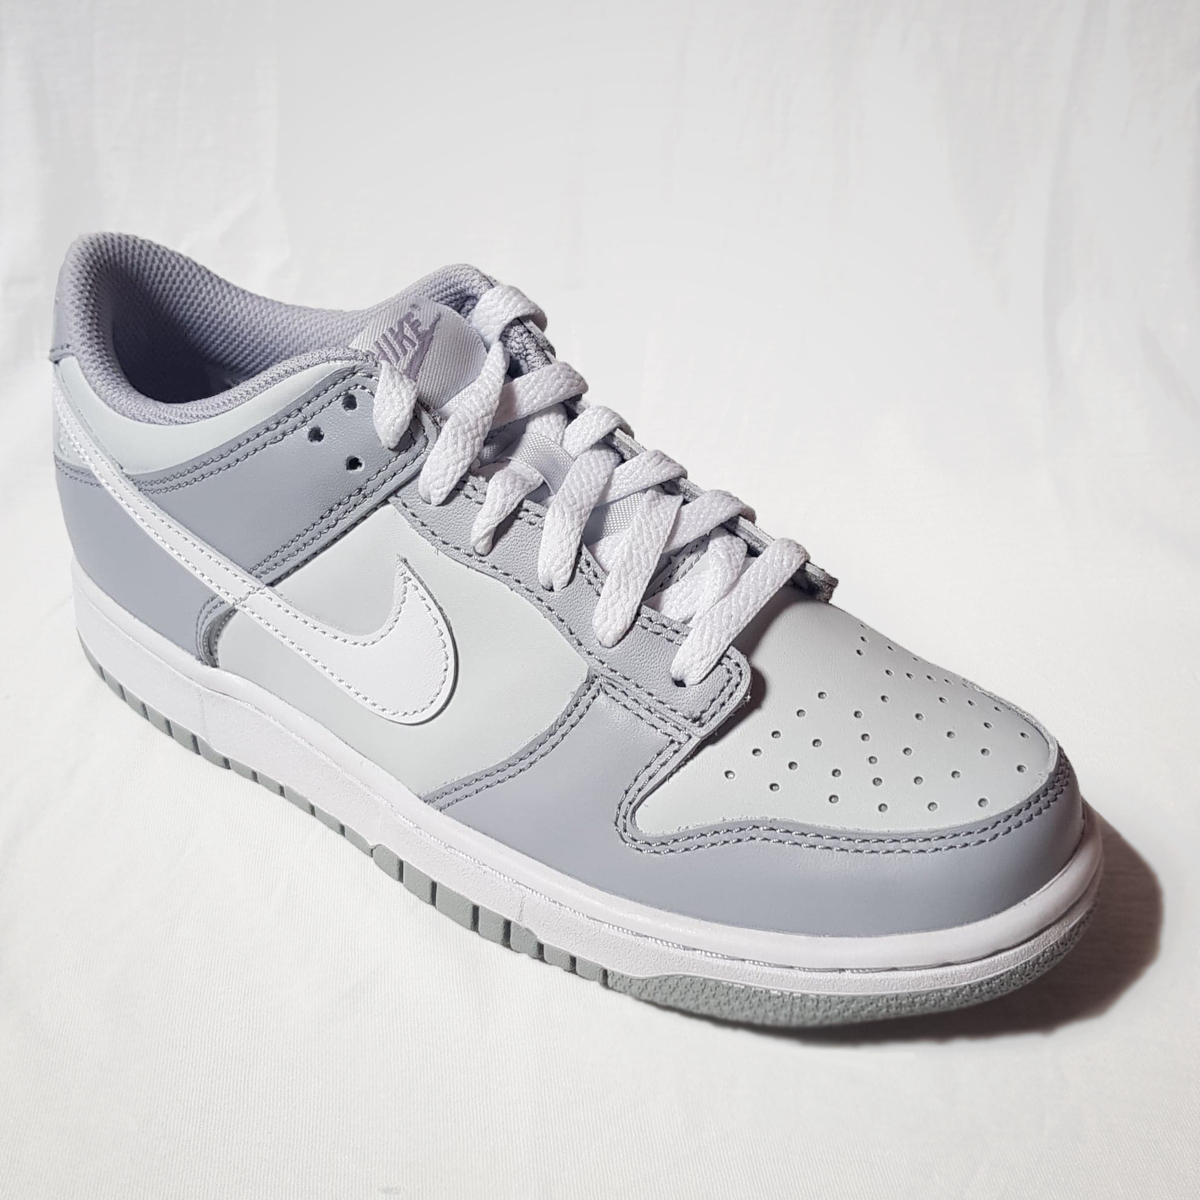 Nike Gris Nike Dunk Low Two Toned Grey (GS) - DH9765-001 - Taille : 37.5 1tYVuZtm